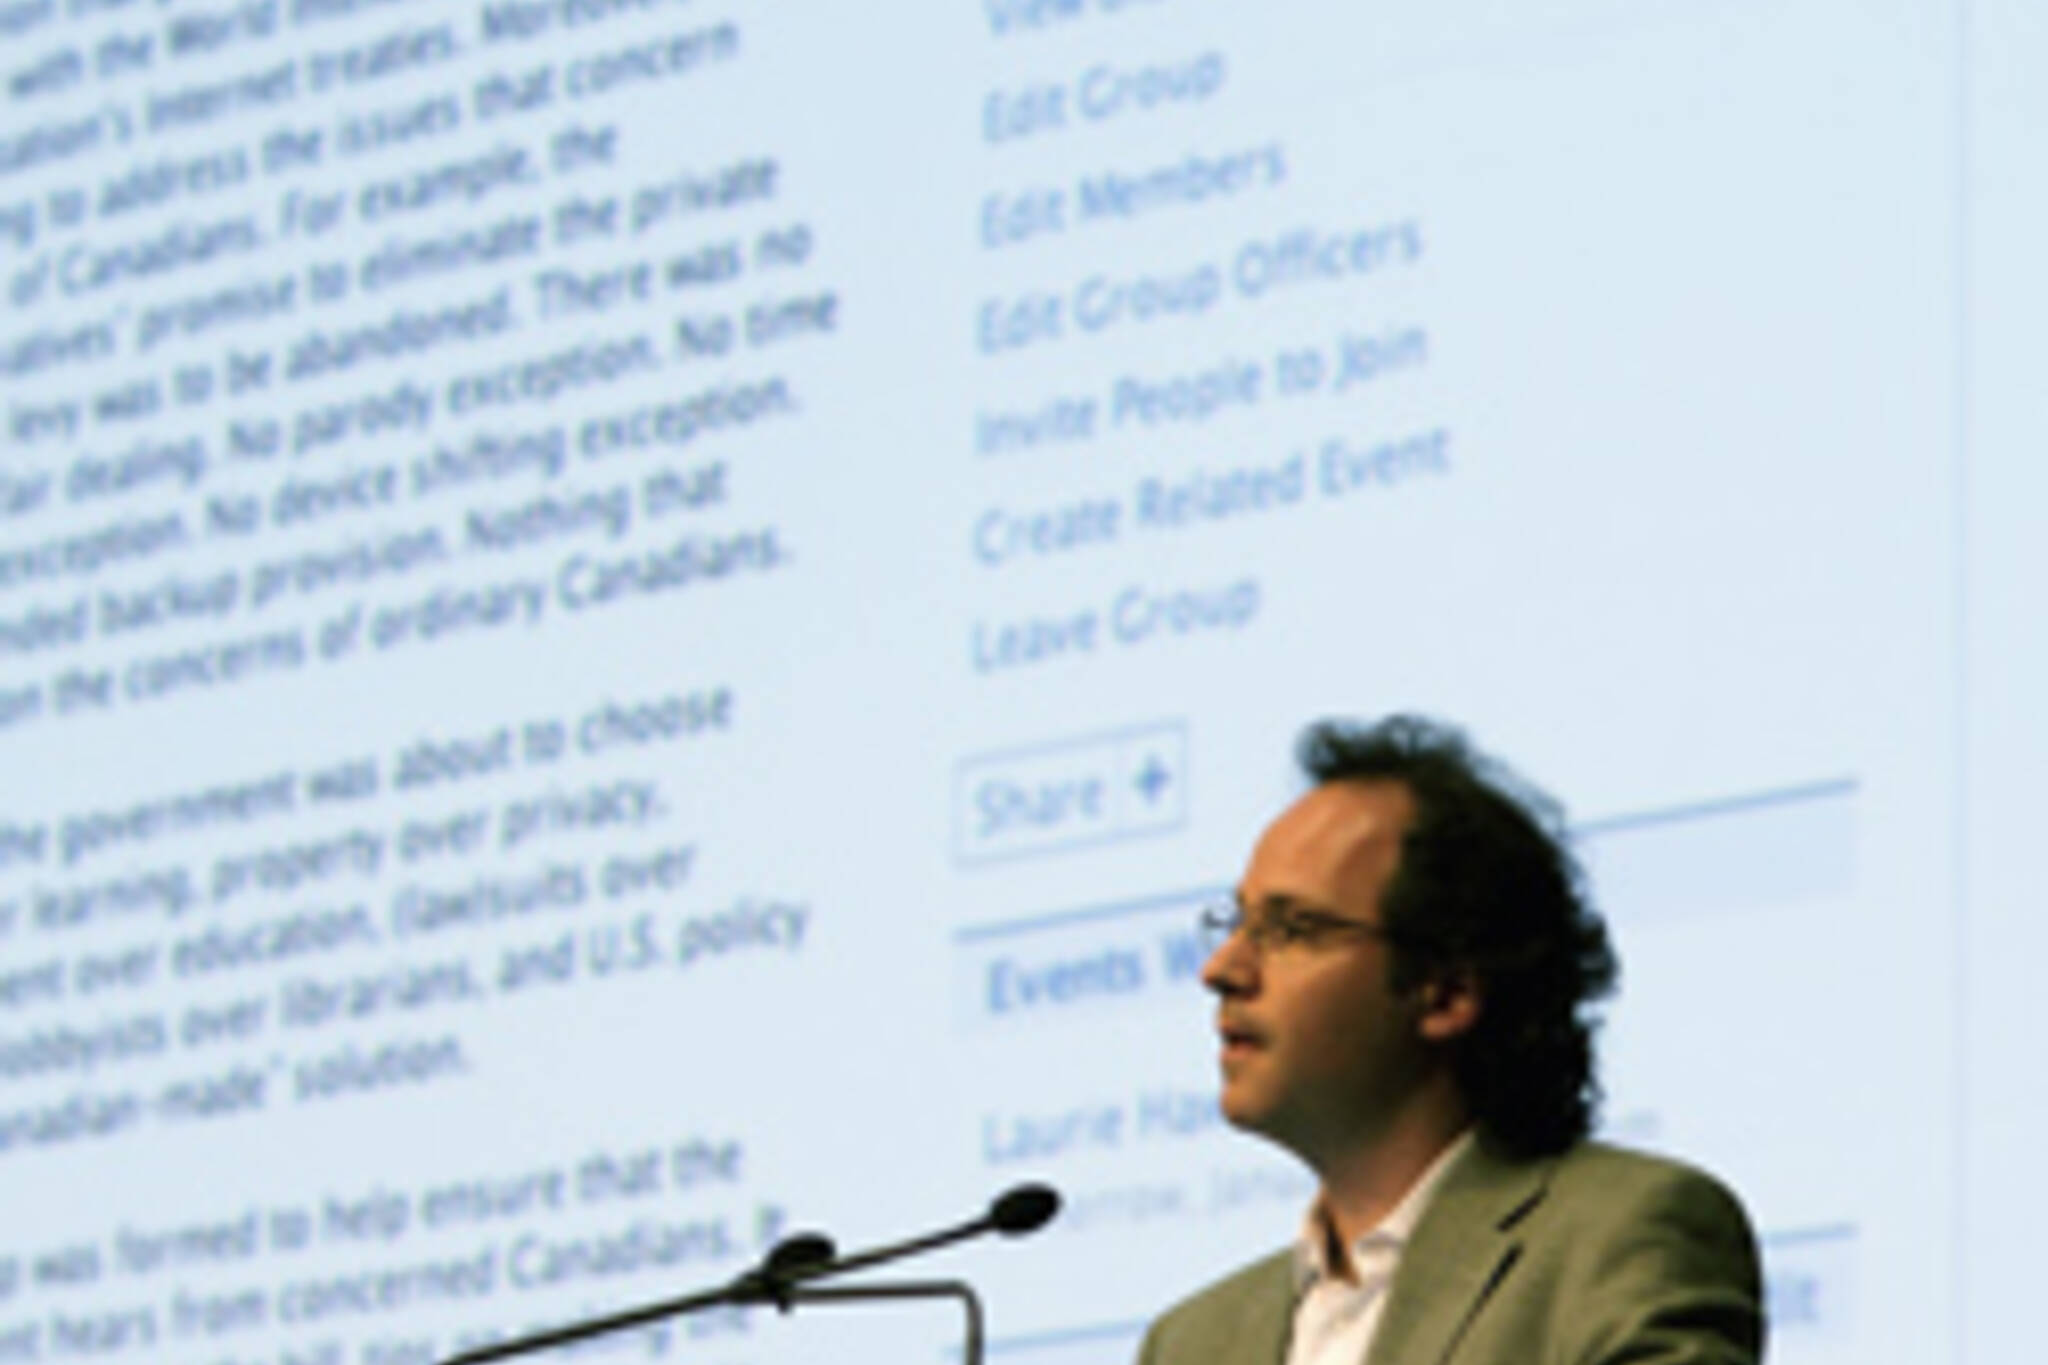 Michael Geist on E-publishing and the Law 1